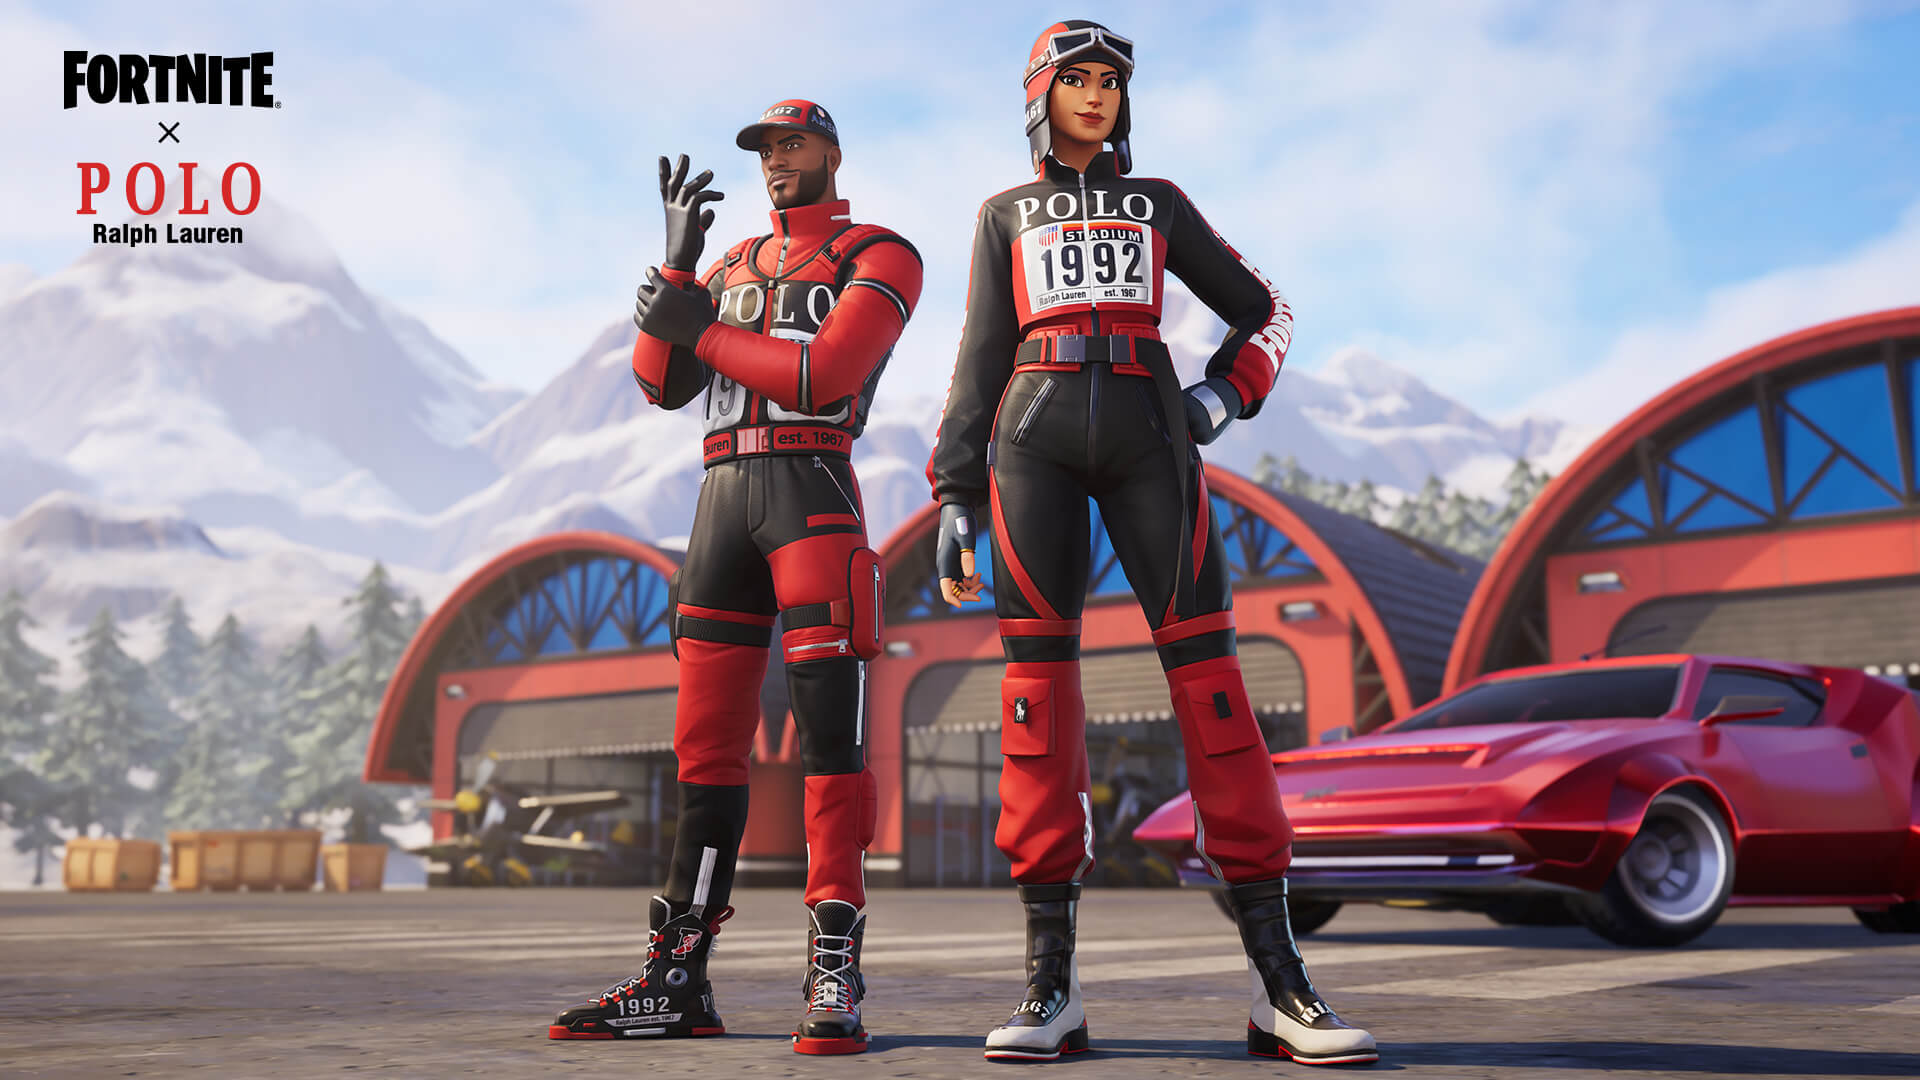 Fortnite collabs with Polo Ralph Lauren for in-game and real-life